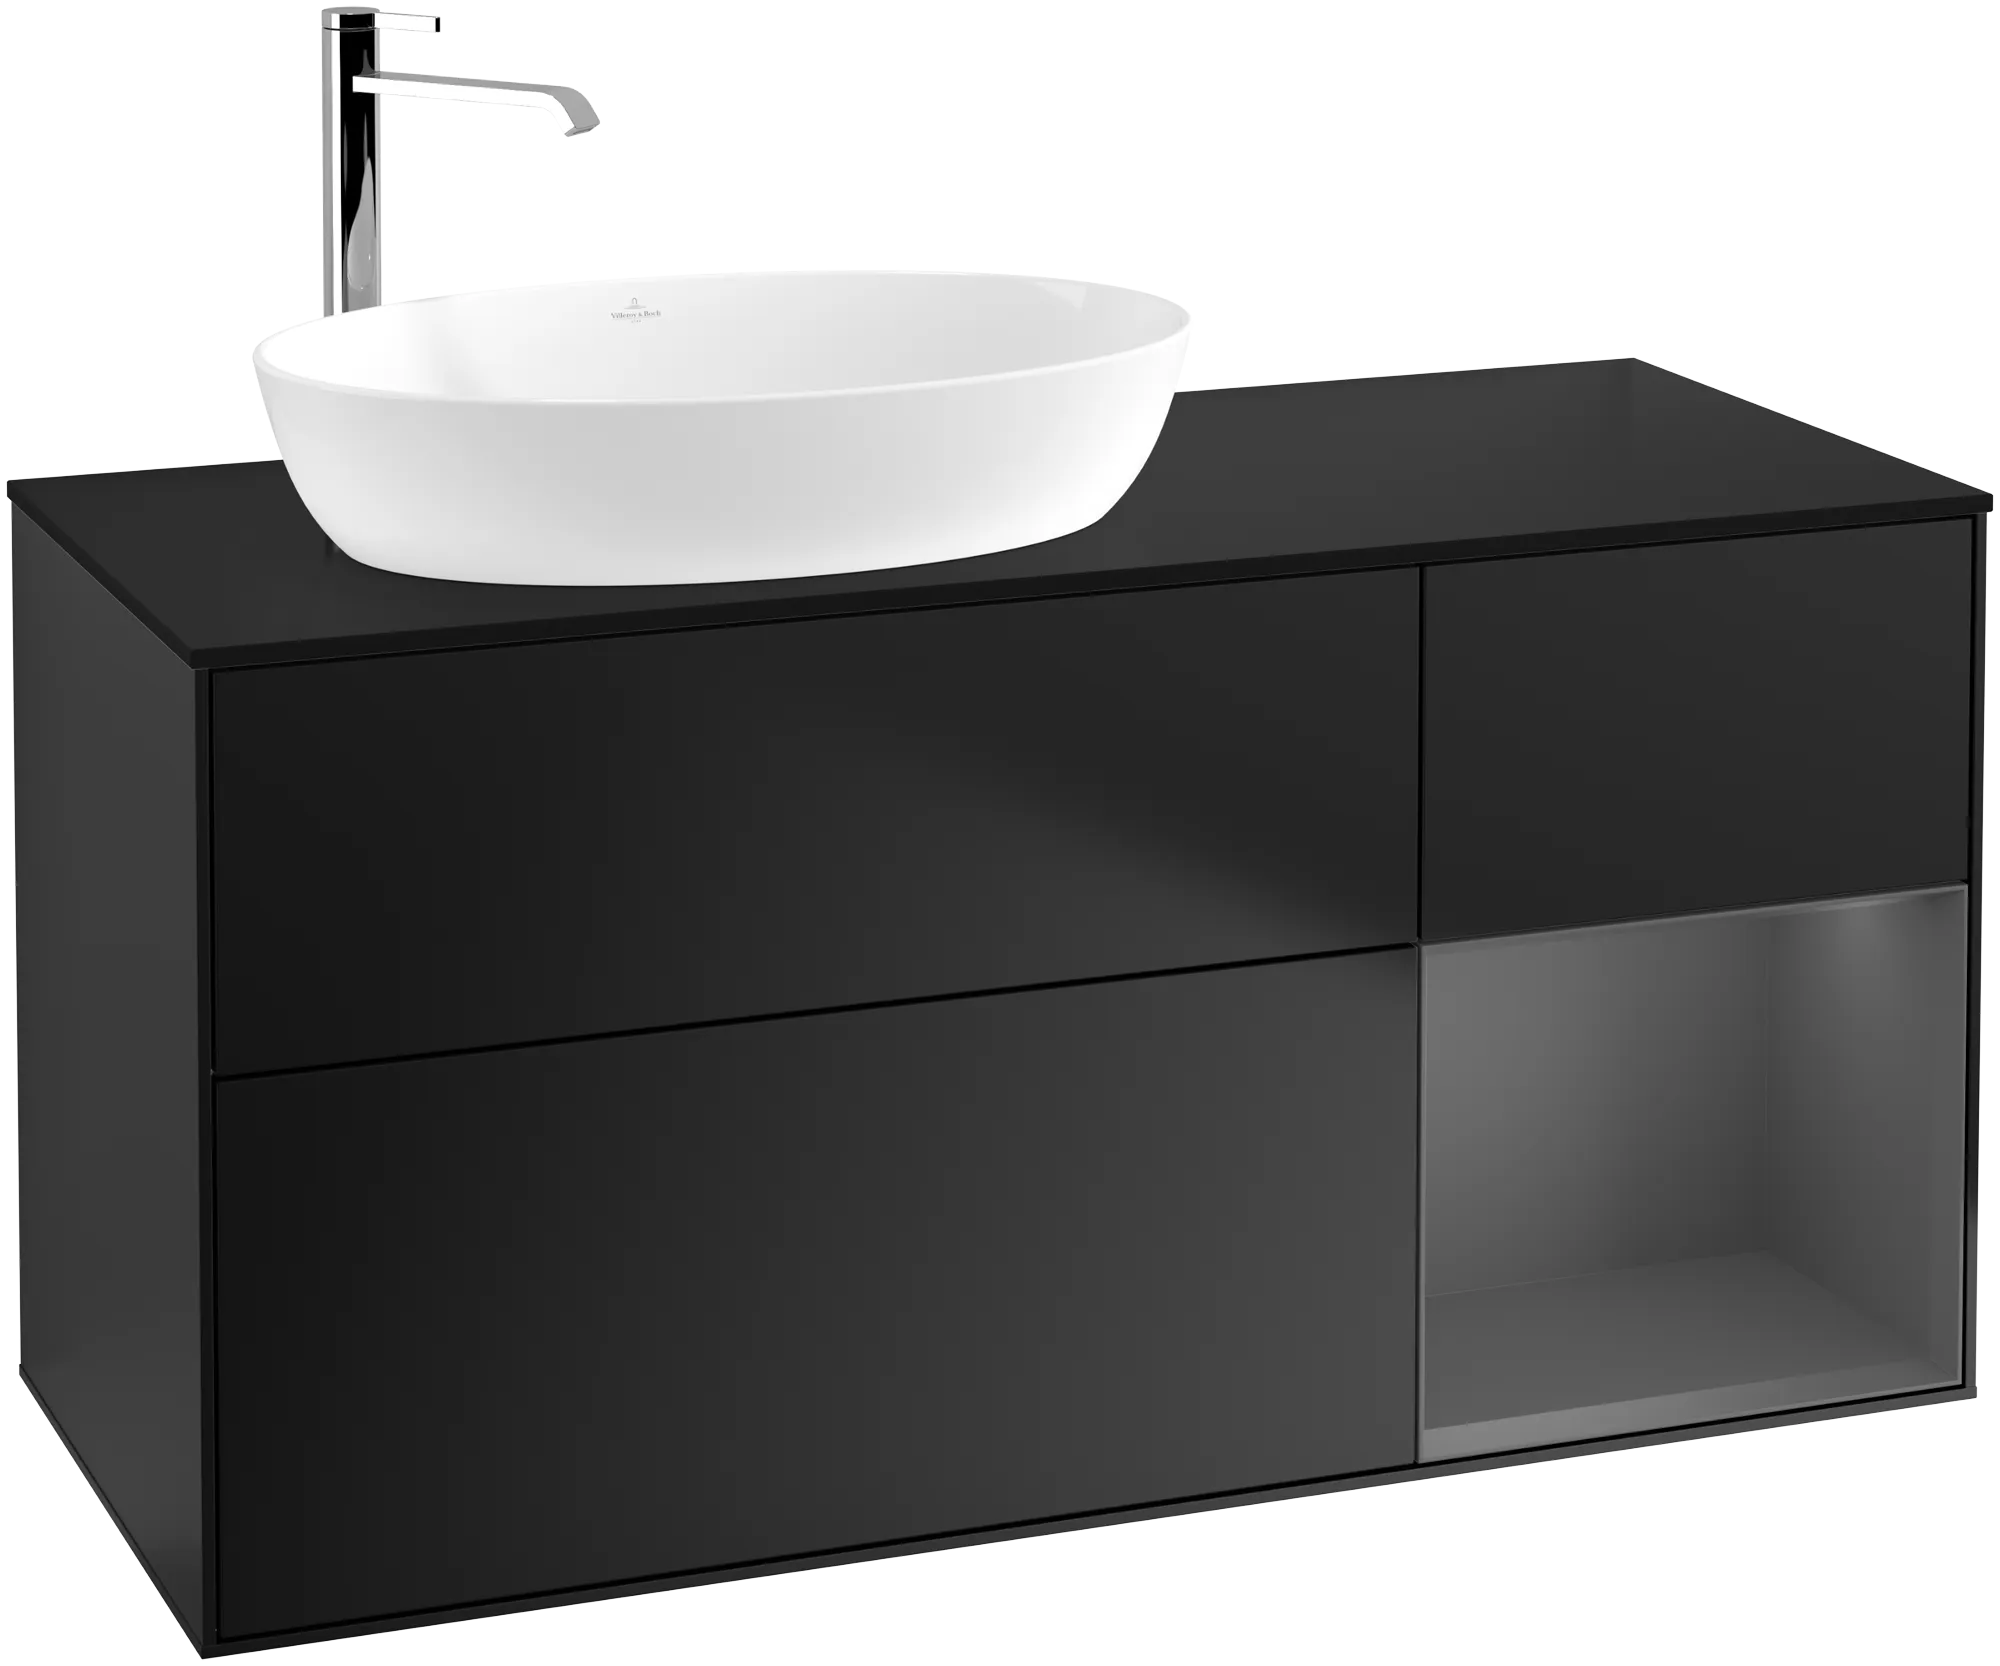 VILLEROY BOCH Finion Vanity unit, with lighting, 3 pull-out compartments, 1200 x 603 x 501 mm, Black Matt Lacquer / Anthracite Matt Lacquer / Glass Black Matt #G932GKPD resmi